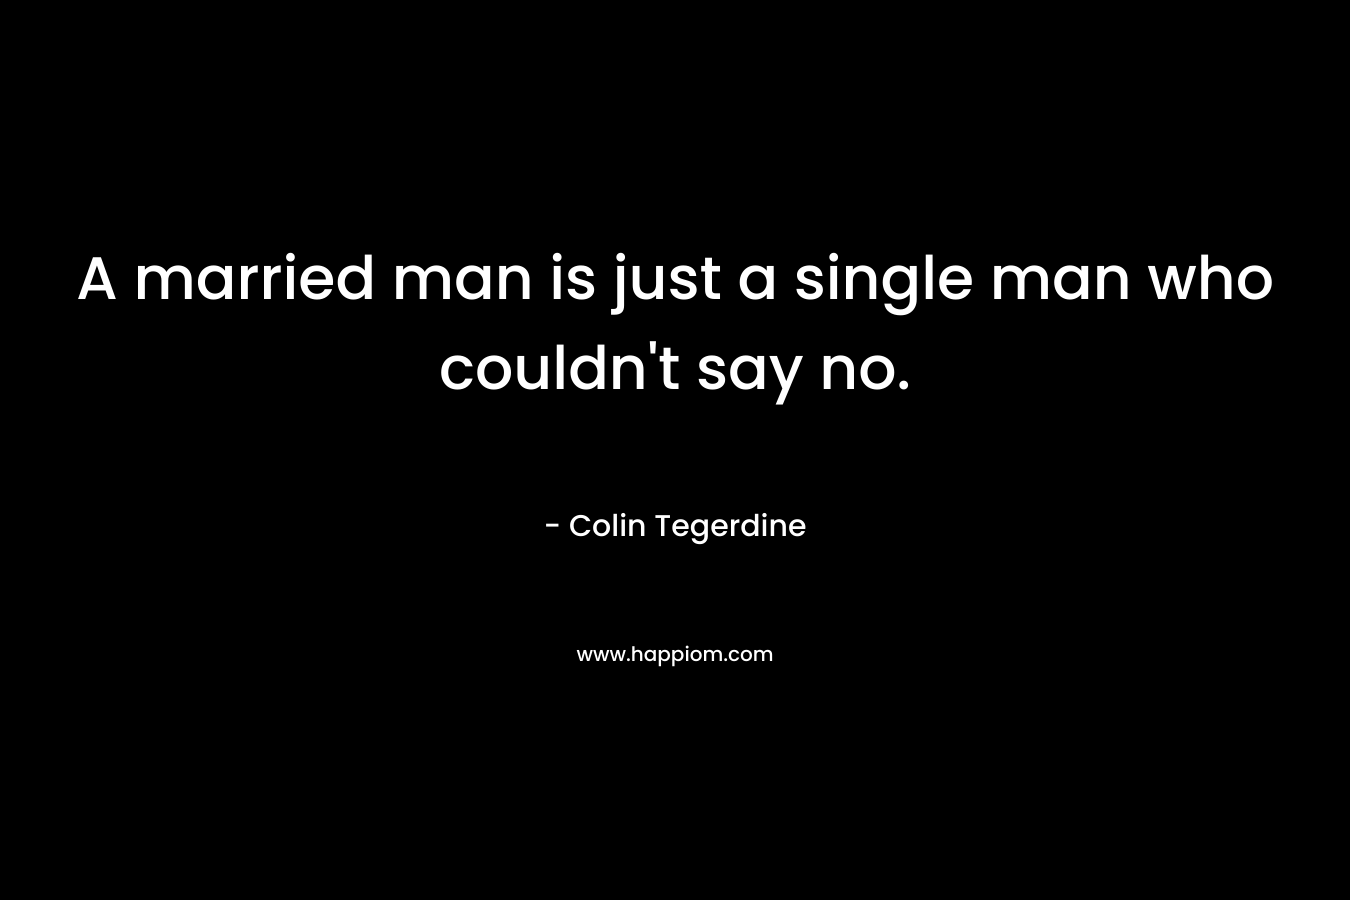 A married man is just a single man who couldn’t say no. – Colin Tegerdine